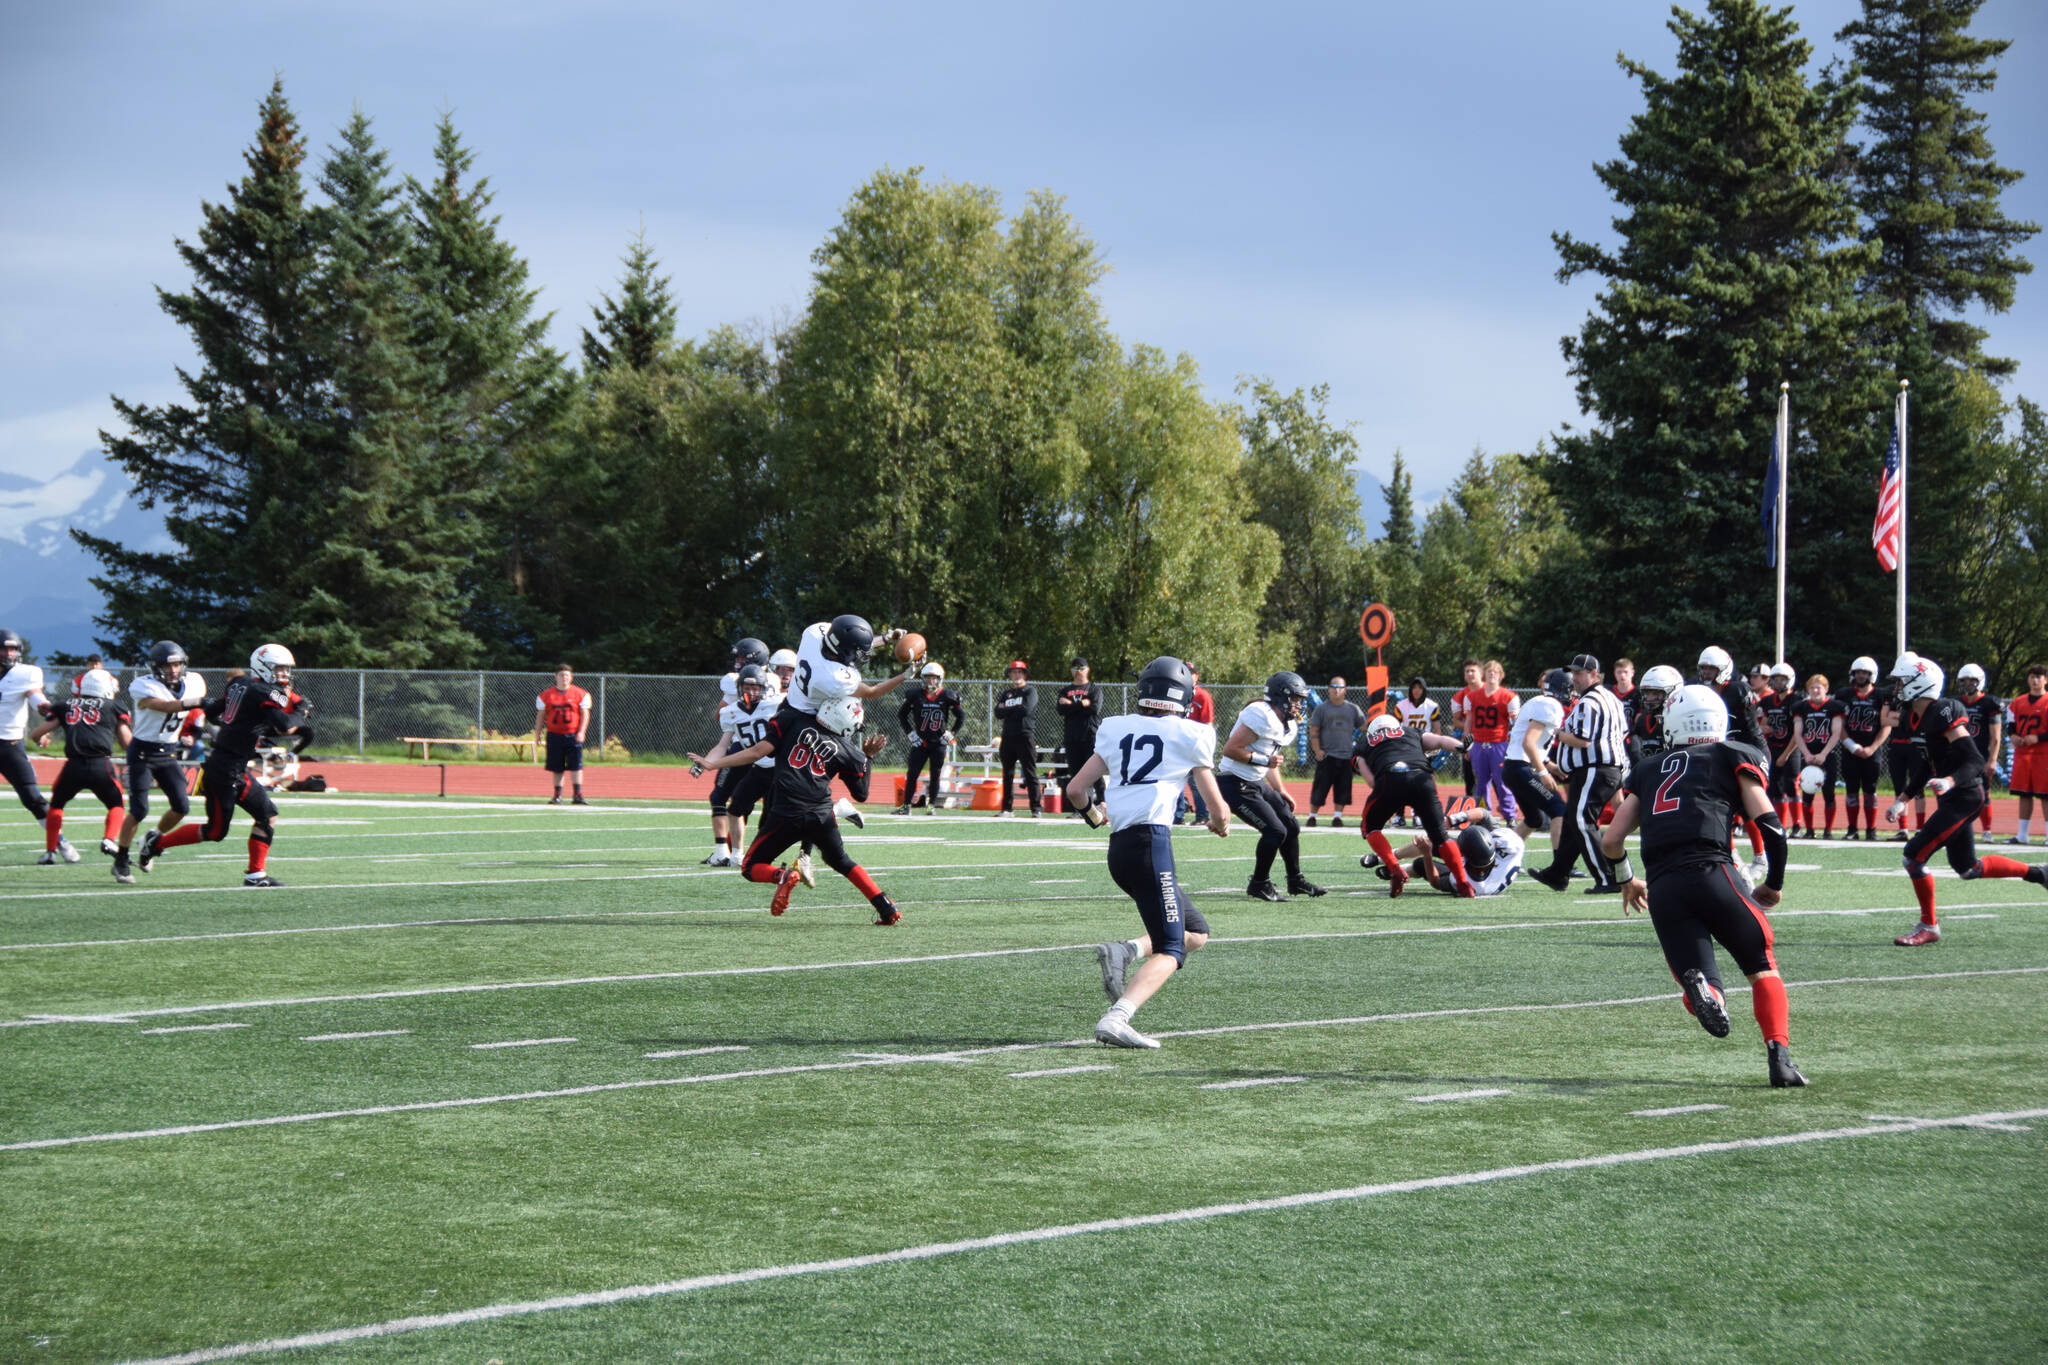 Martin catches the ball while being tackled on Saturday, Sep. 3, at the Homer High School Field in Homer, Alaska. (Photo by Charlie Menke/ Homer News)